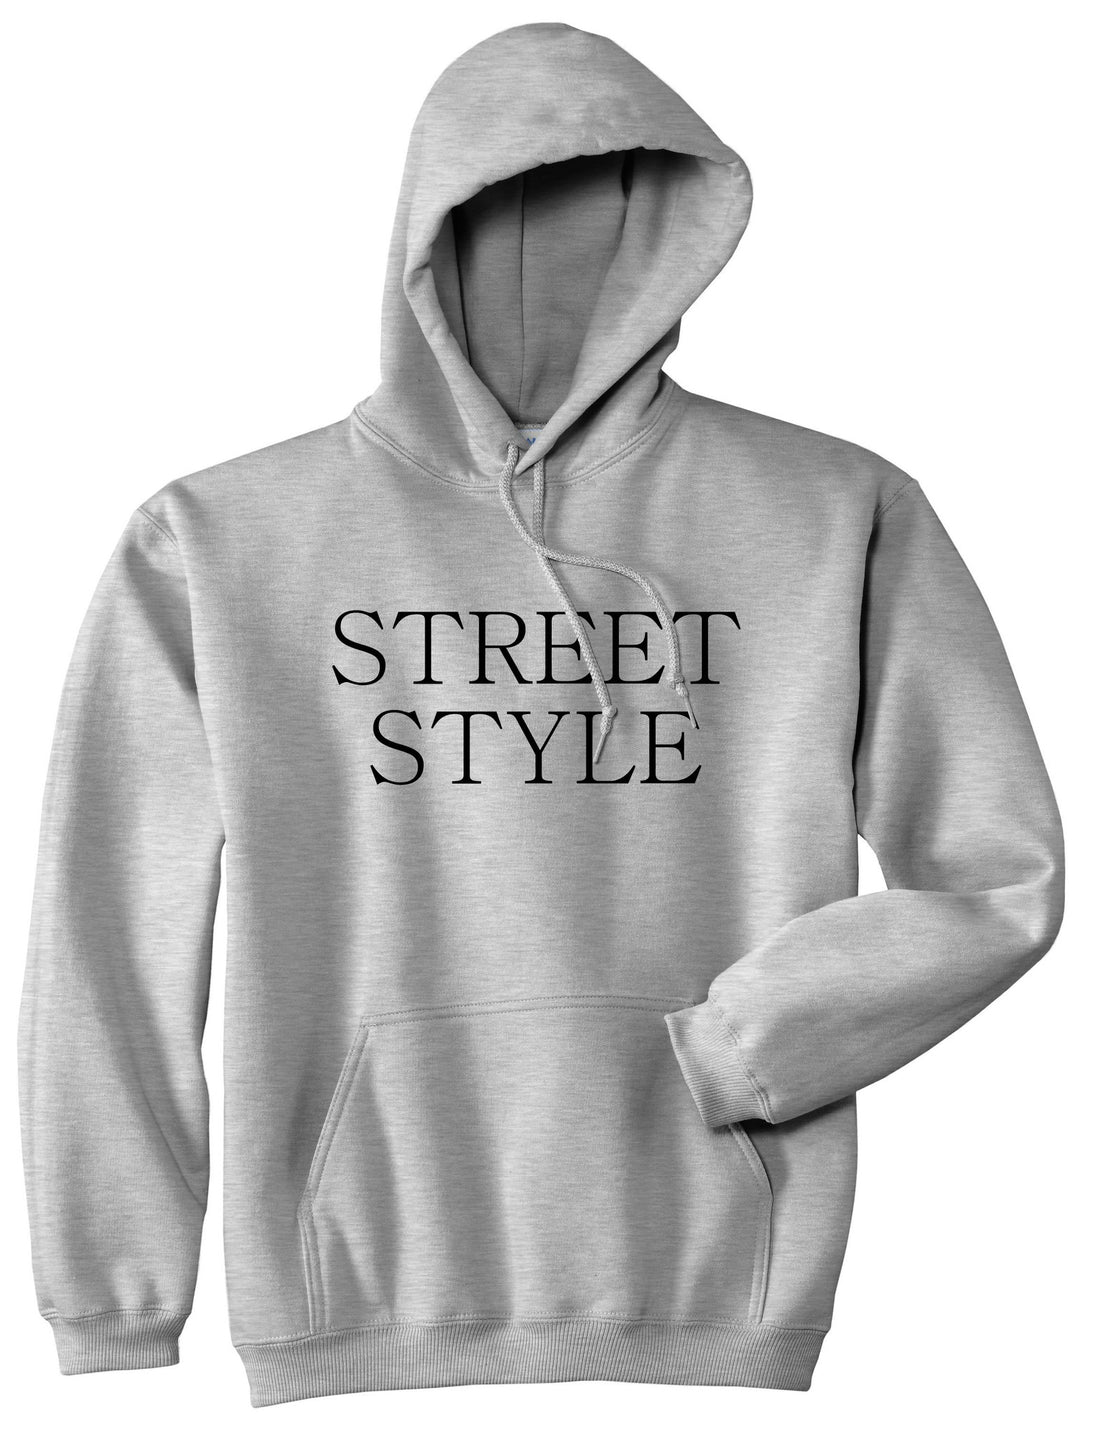 Street Style Photography Pullover Hoodie Hoody in Grey by Kings Of NY